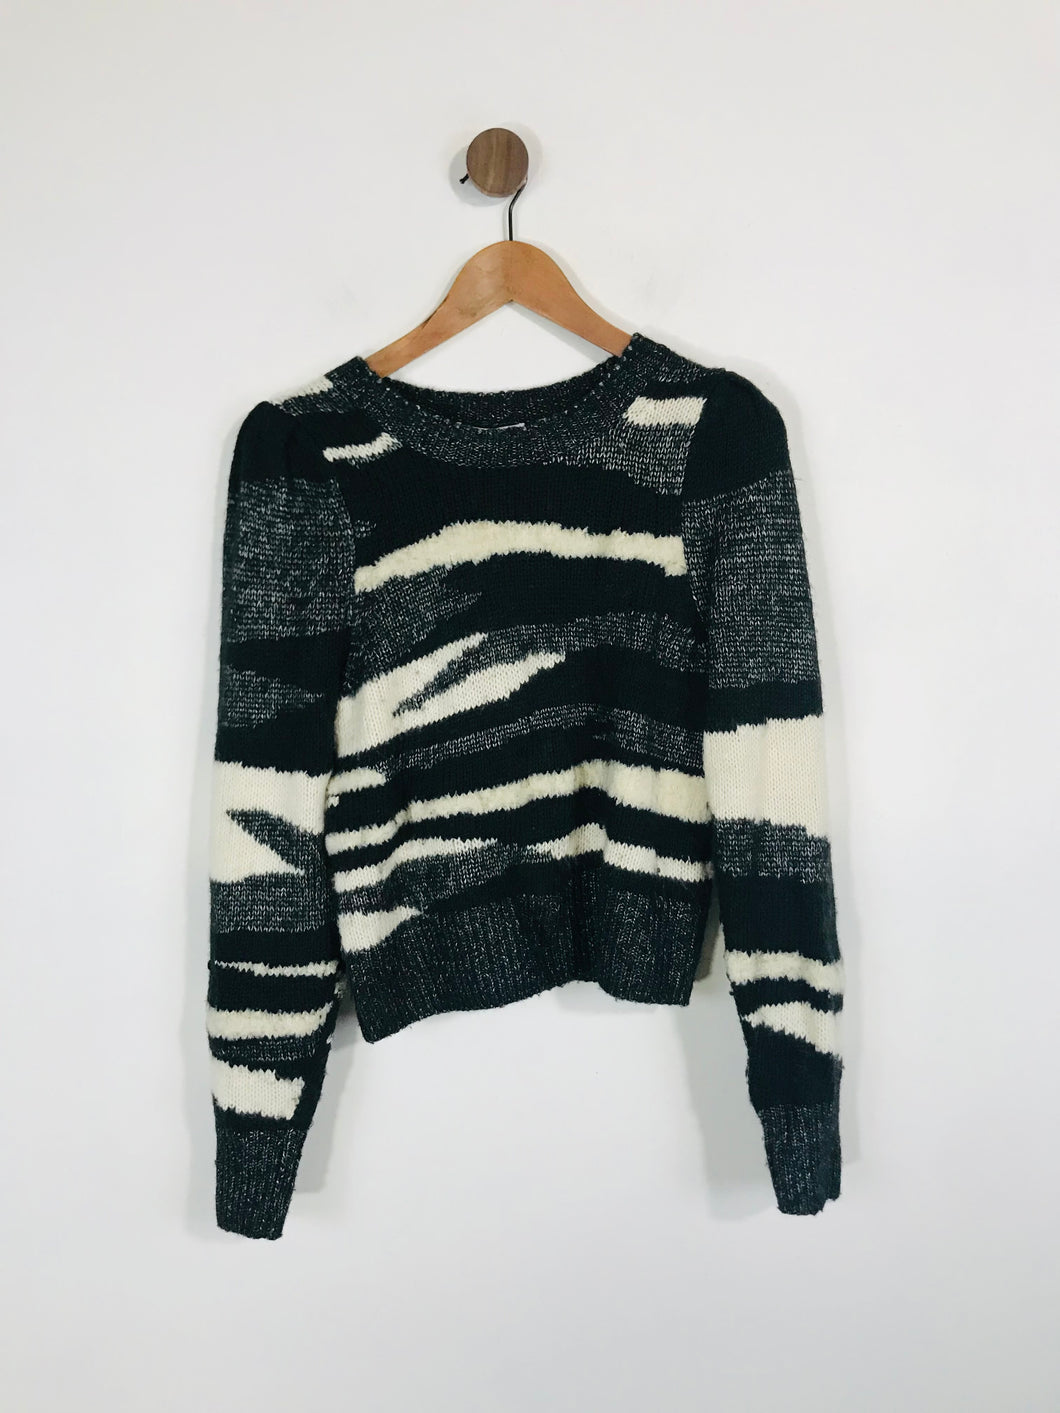 & Other Stories Women's Cotton Wool Jumper | S UK8 | Multicoloured